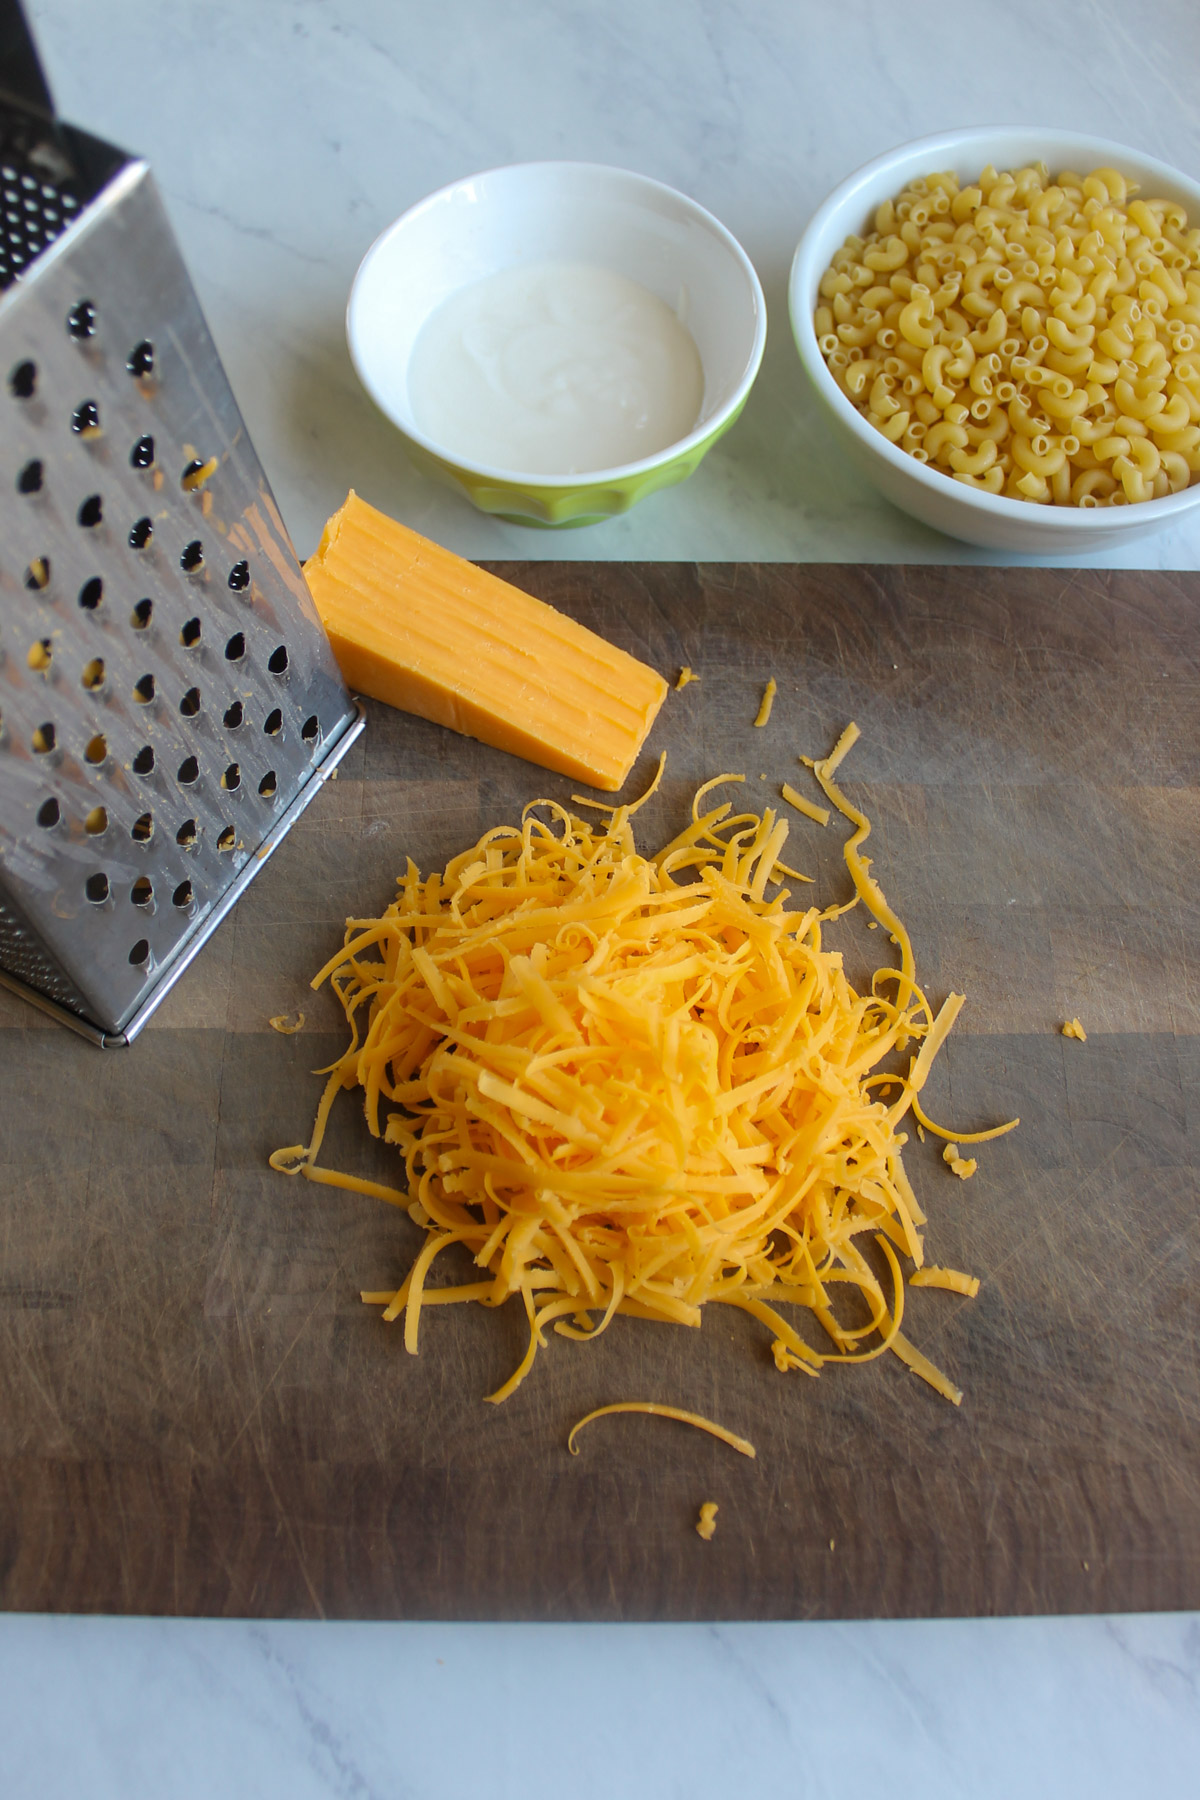 Shredded cheddar cheese on a cutting board with a box grater.